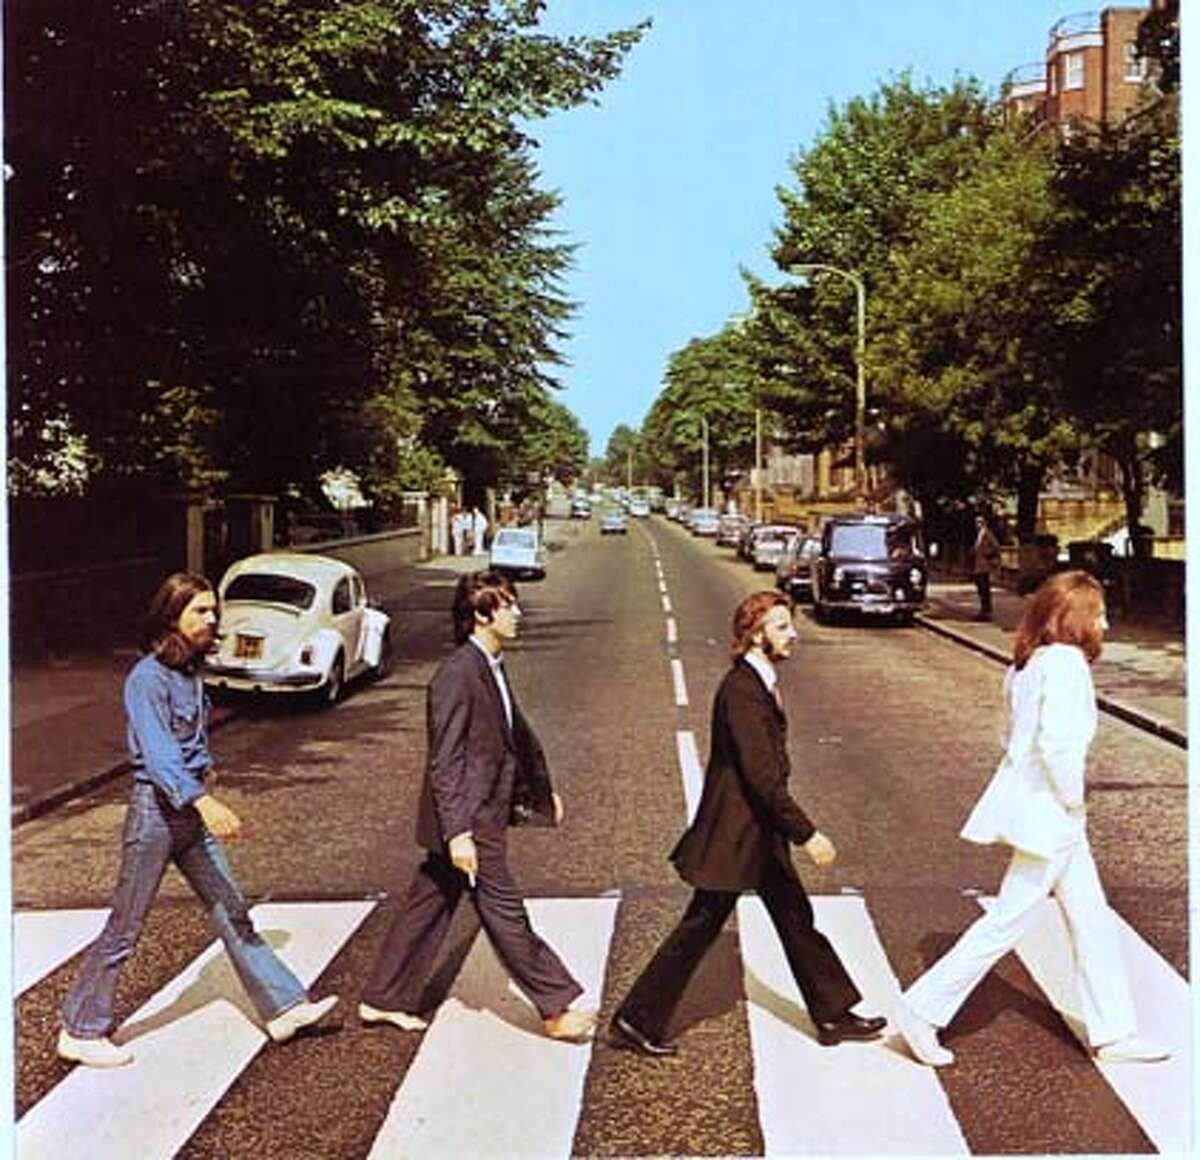 "Abbey Road" is among the Beatles' albums for Apple Records, part of Apple Corps. Image courtesy of Apple Corps